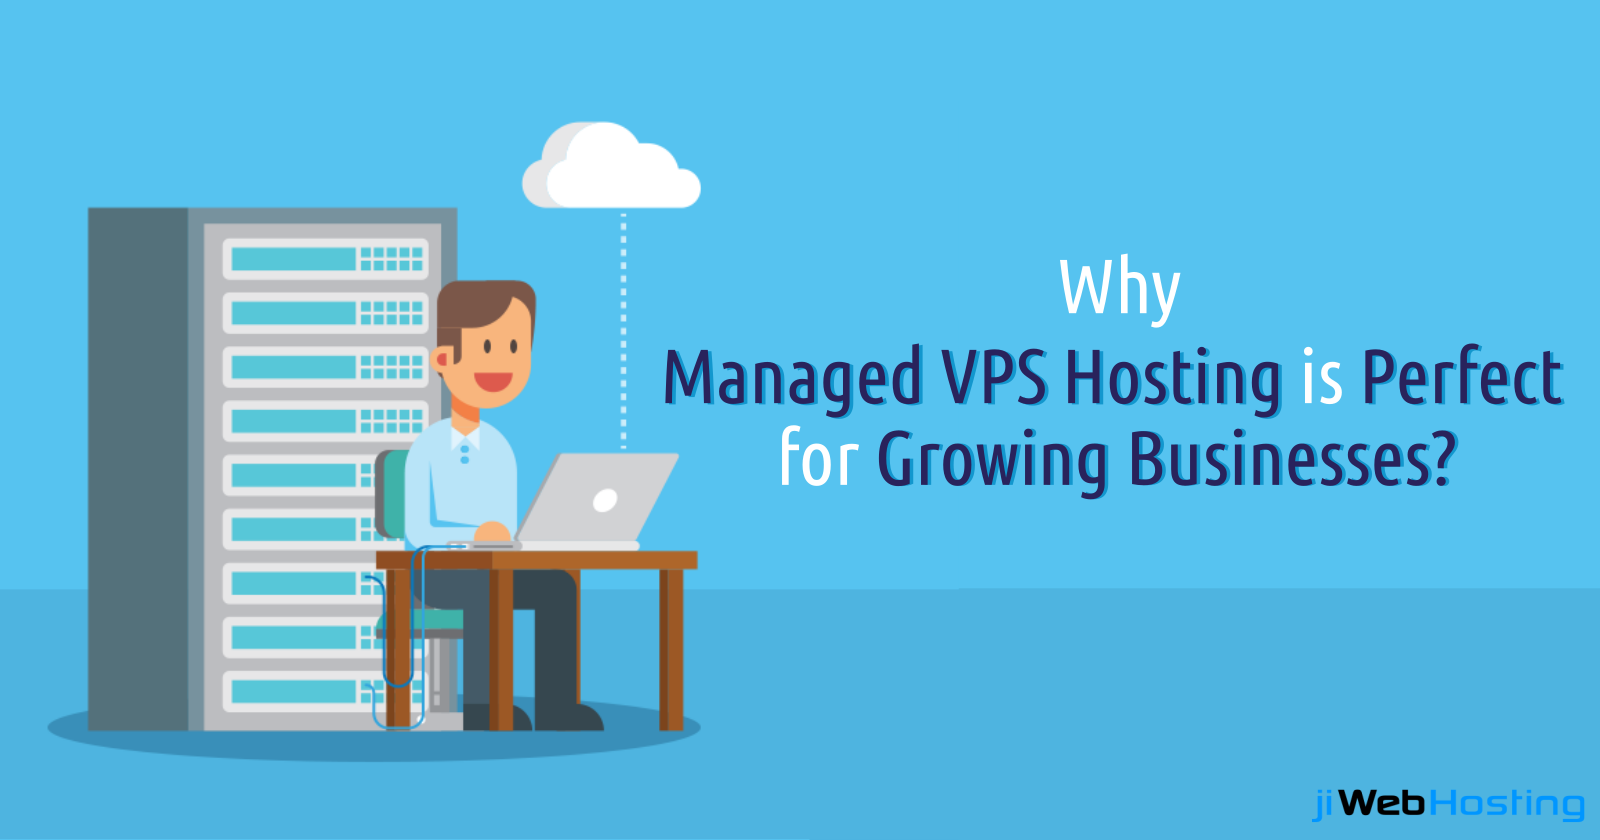 Why Managed VPS Hosting is Perfect for Growing Businesses?